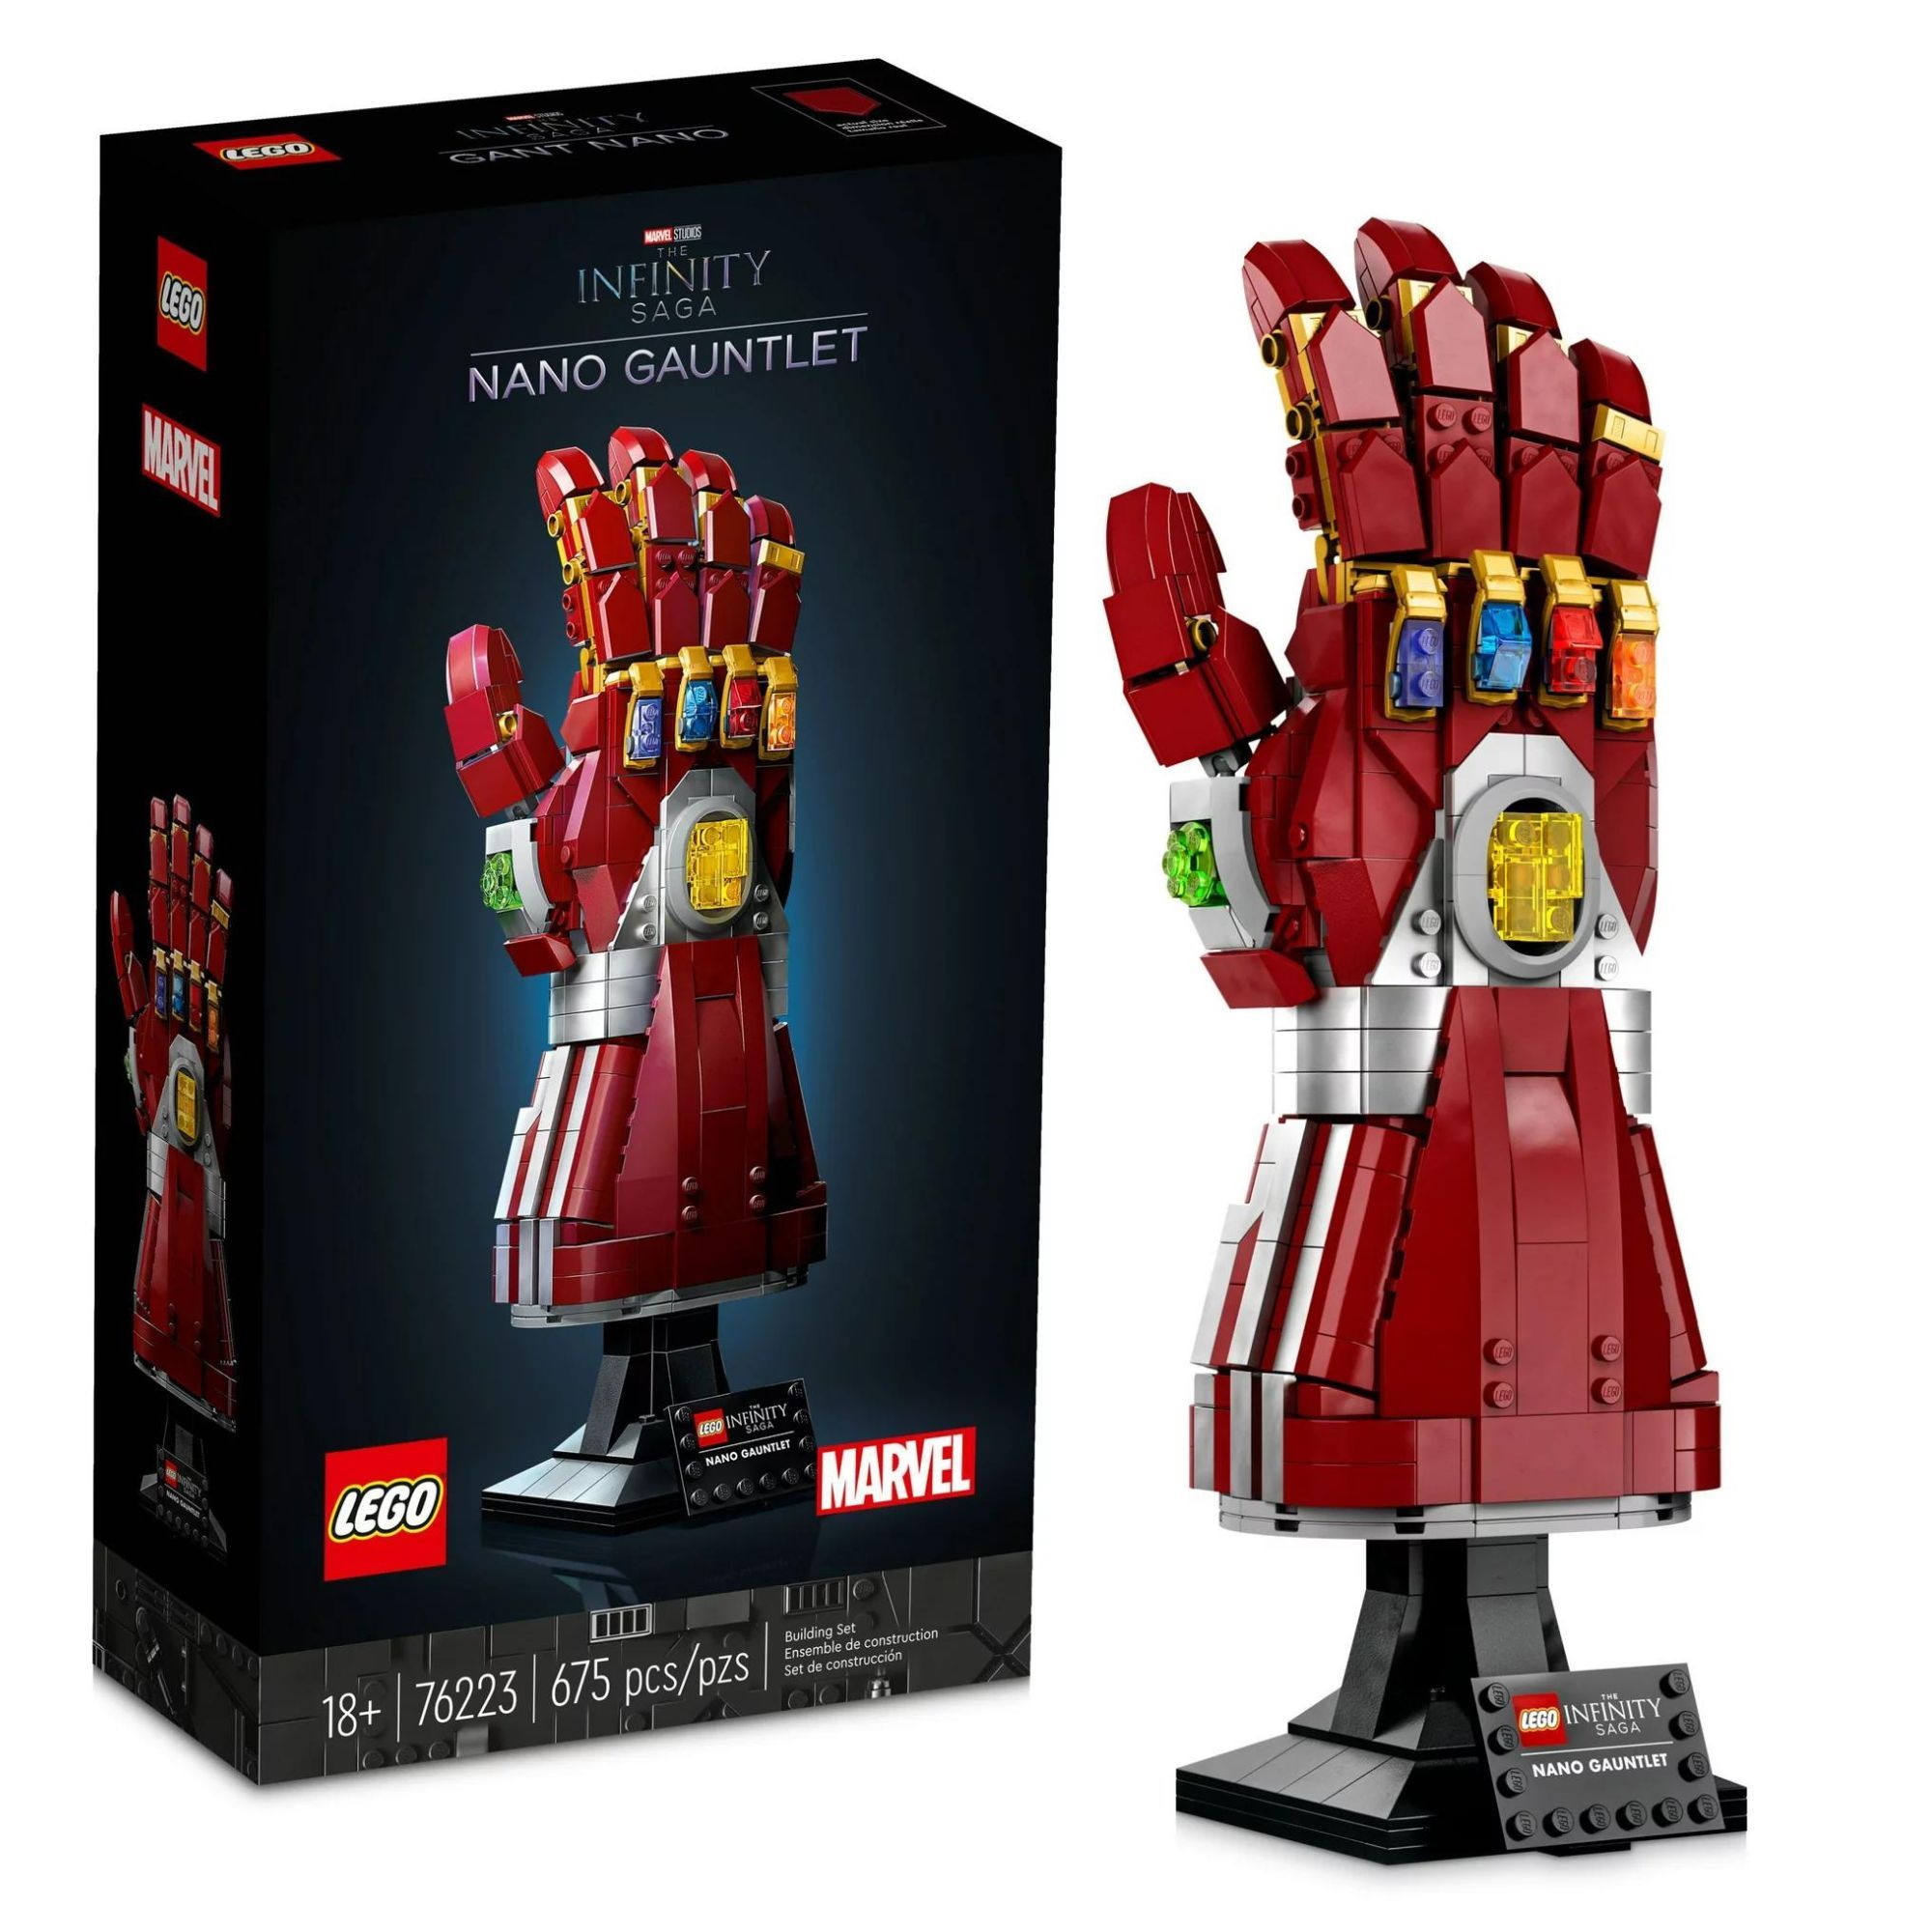 Product still of the LEGO Marvel Nano Gauntlet on a white background